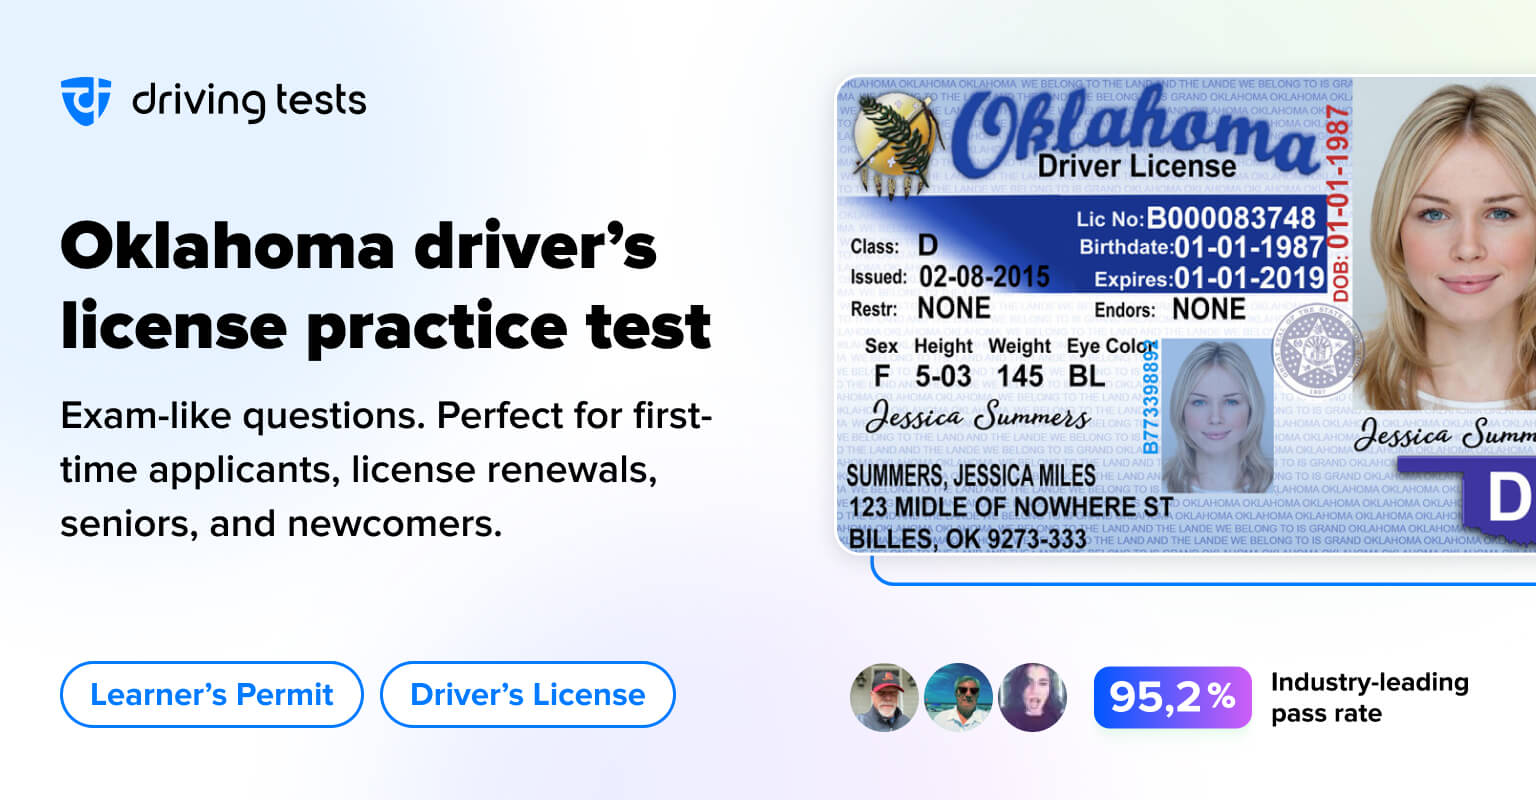 Ace Your Driving Skills  High School Practice Test #1